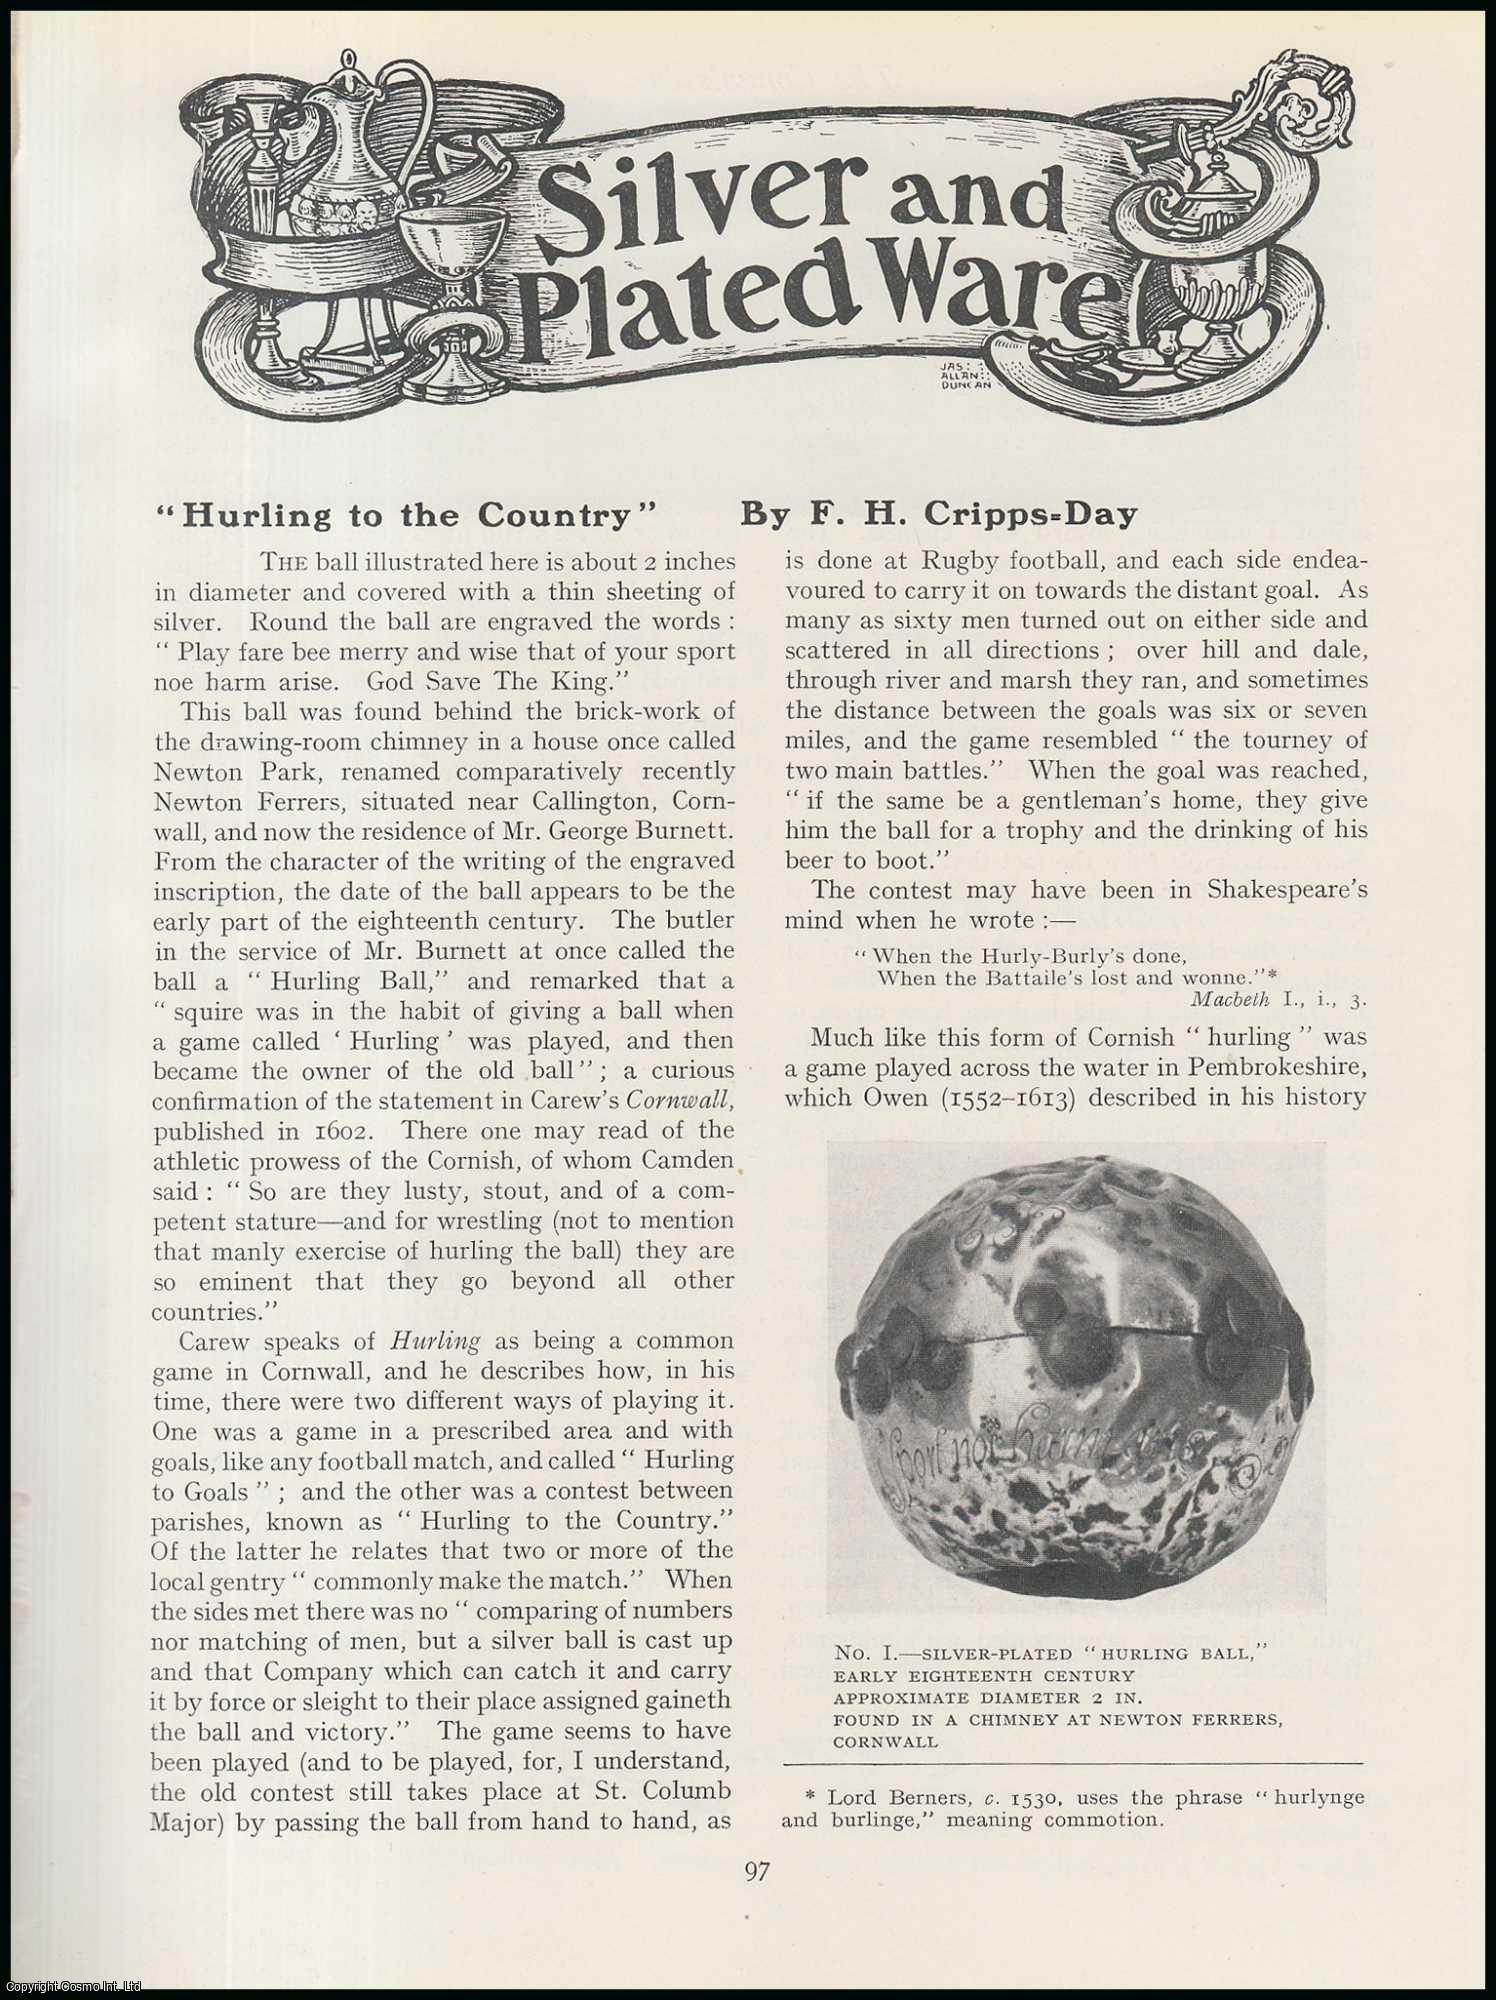 F. H. Cripps-Day - Hurling to The Country : Silver-Plated Hurling Ball which is used in a common Ball game in Cornwall. An original article from The Connoisseur, 1927.